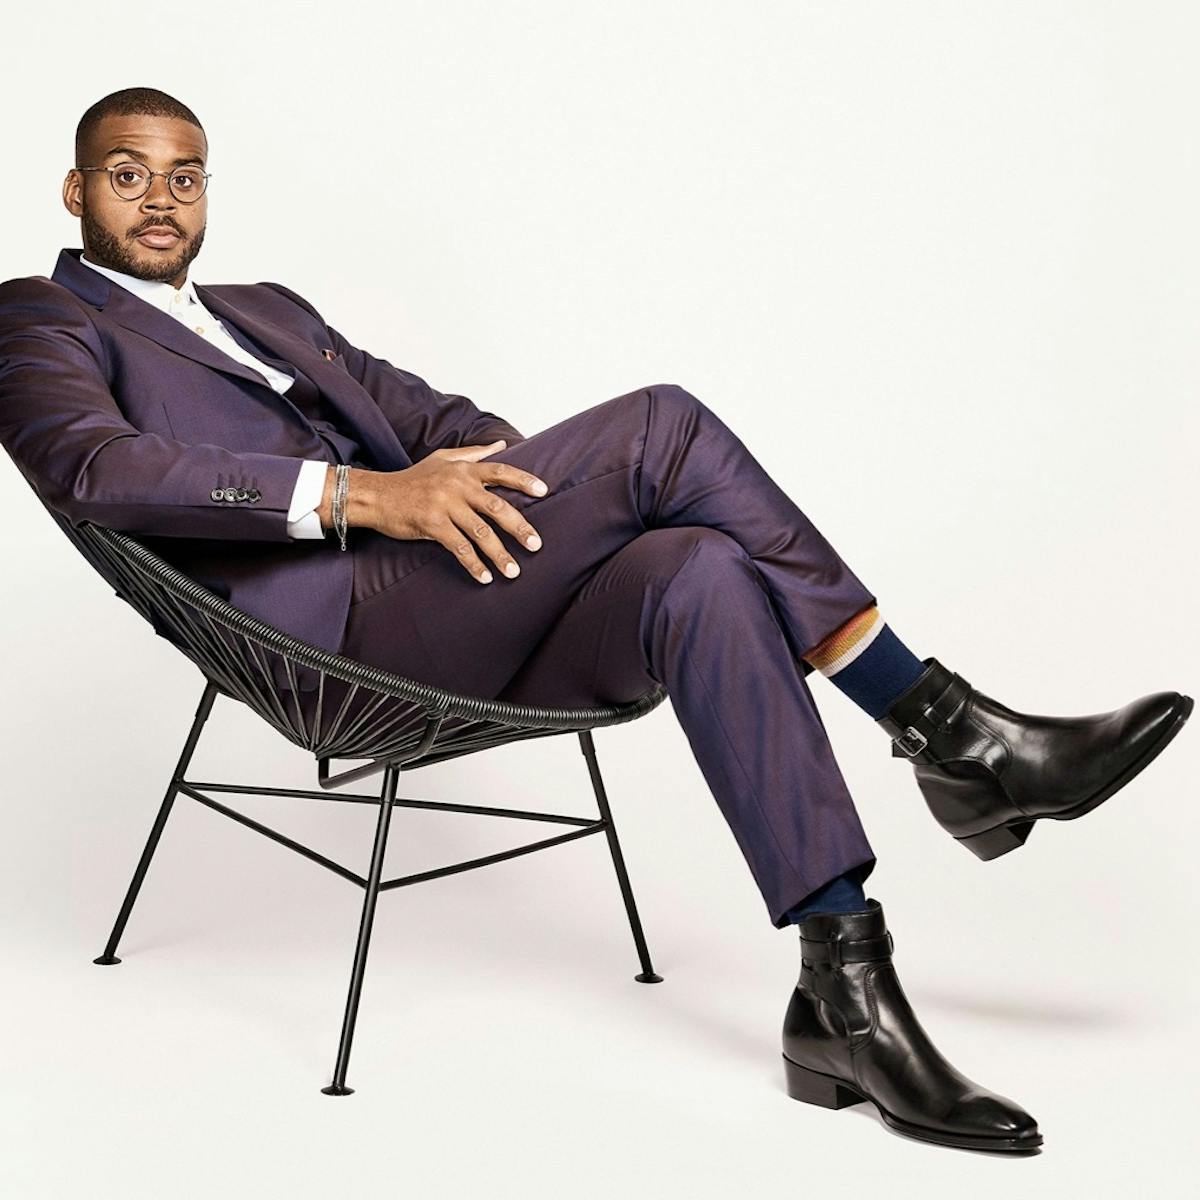 Kris Bowers sits in a black chair. He wears a beautiful purplish-blue suit, white shirt, black boots, navy socks, and circular glasses. He looks chic and calm as he looks directly at the camera.